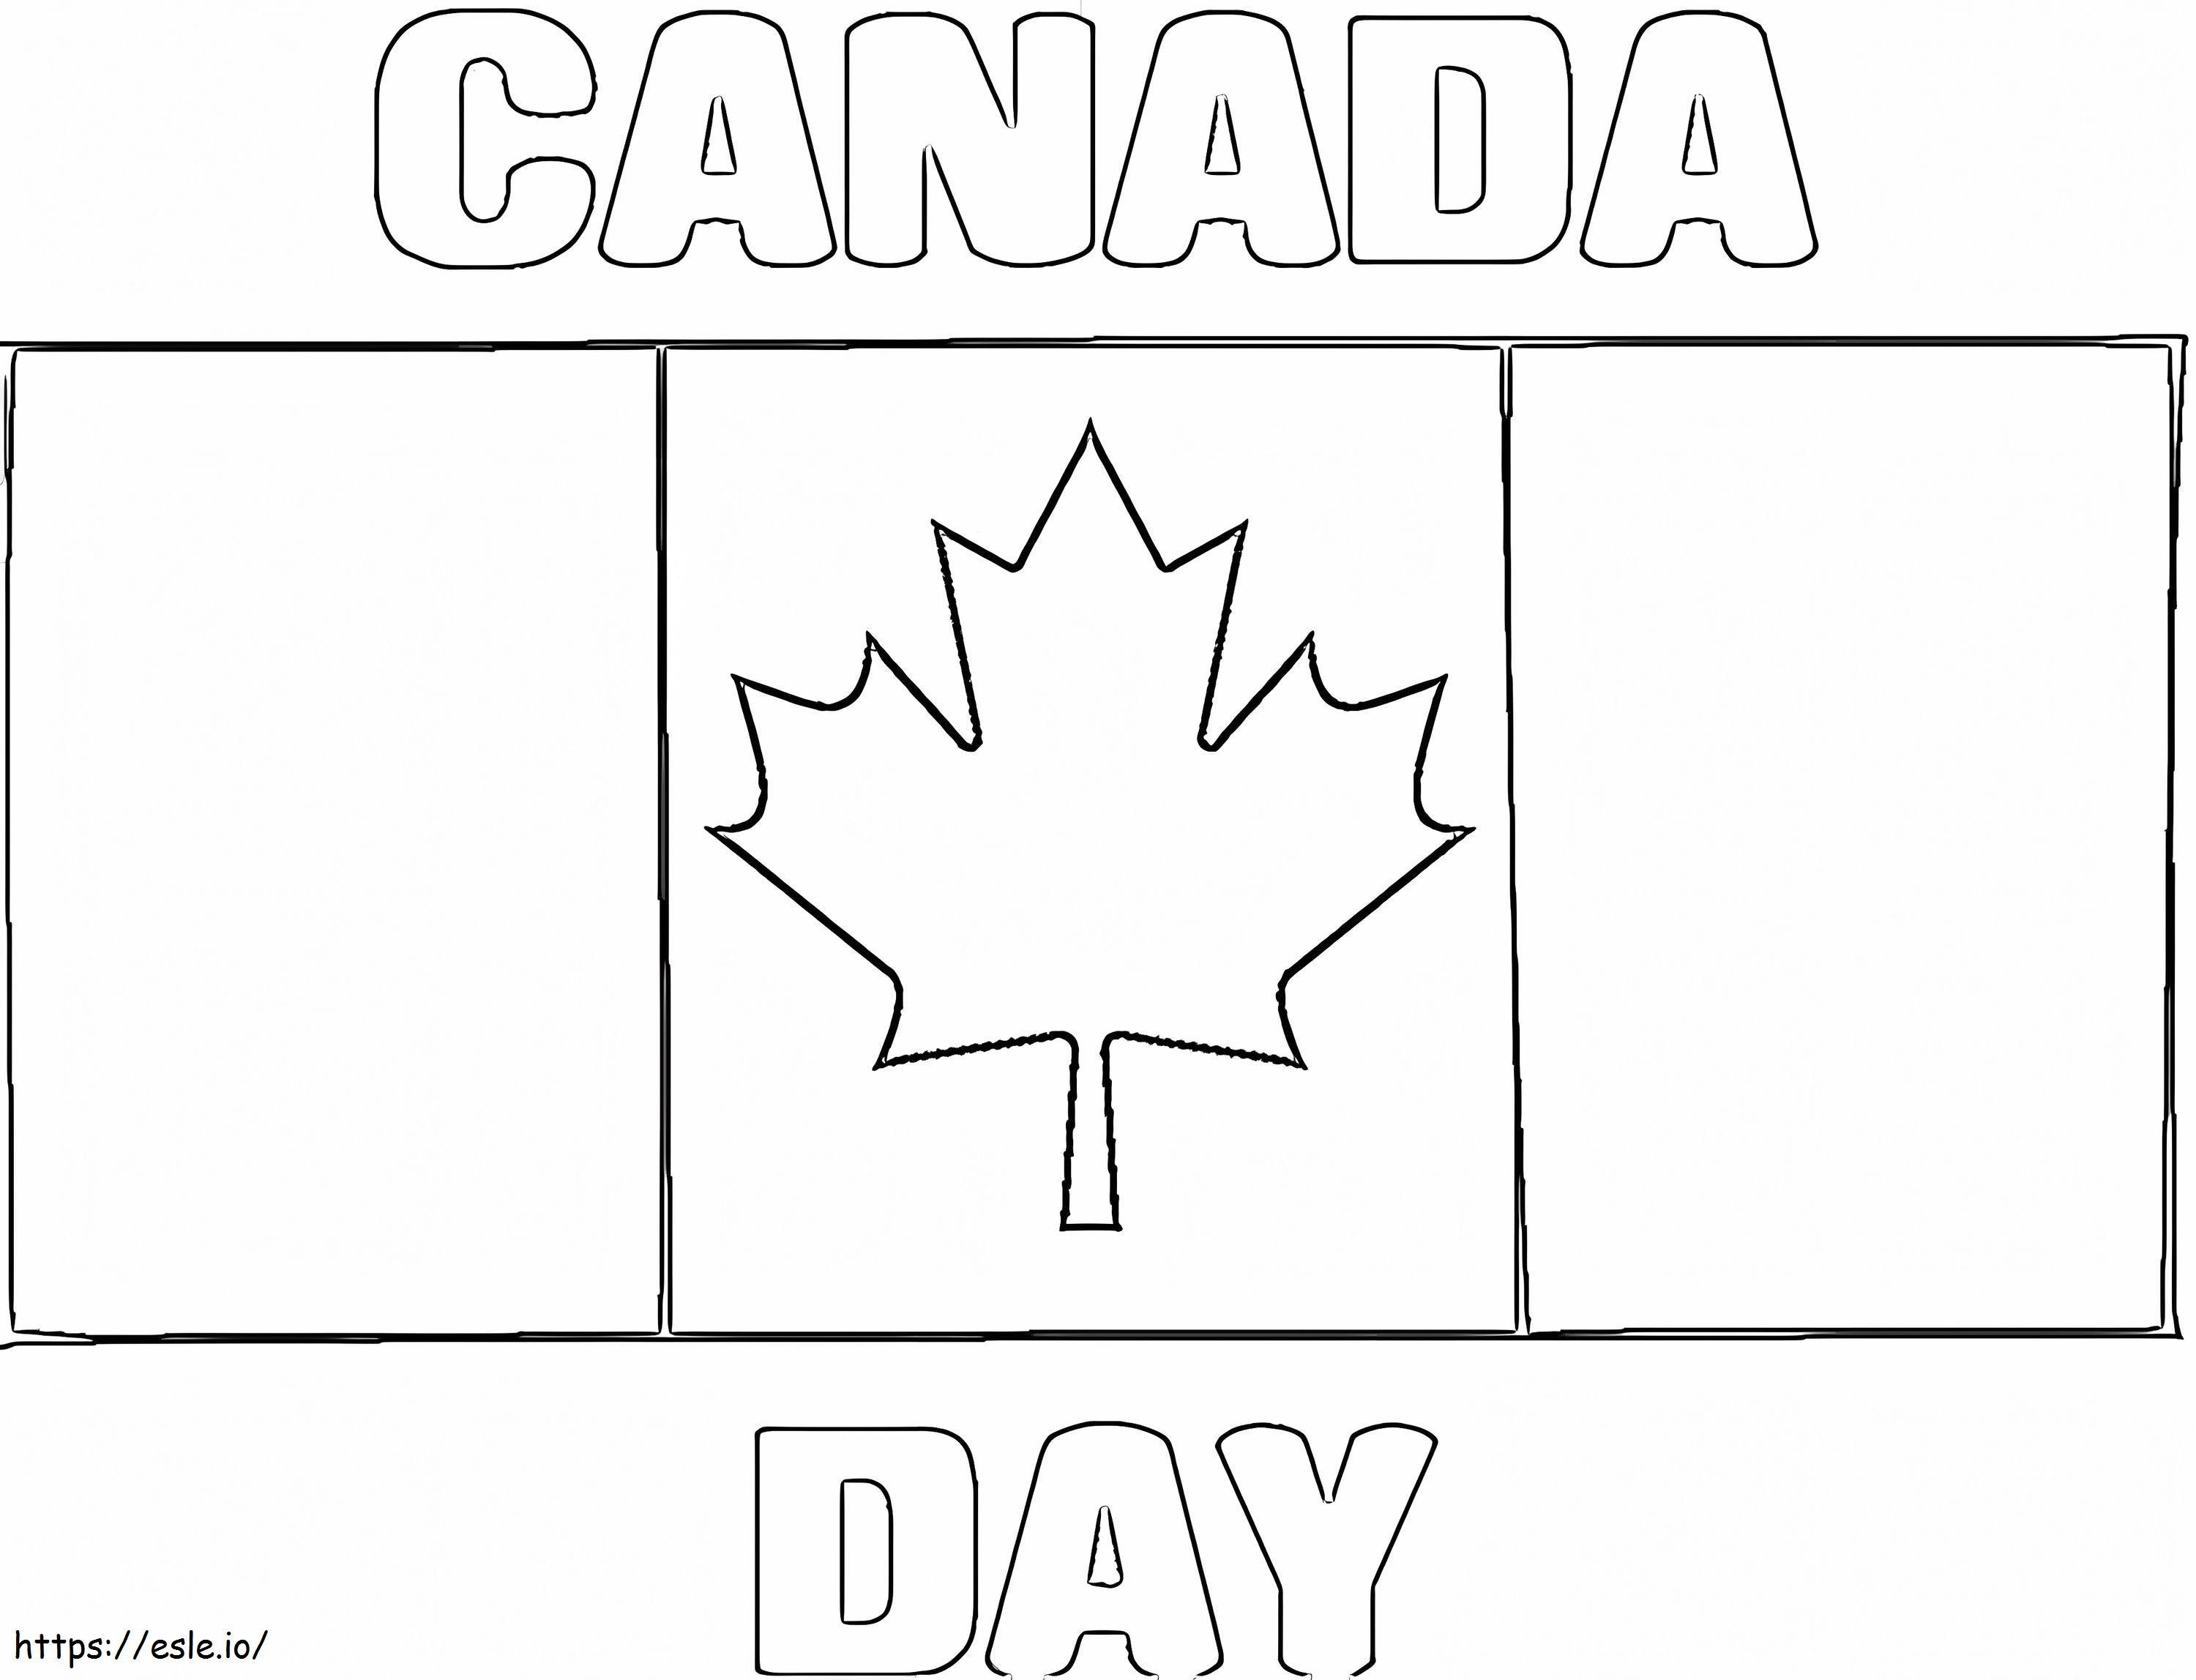 Canada Day Flag coloring page